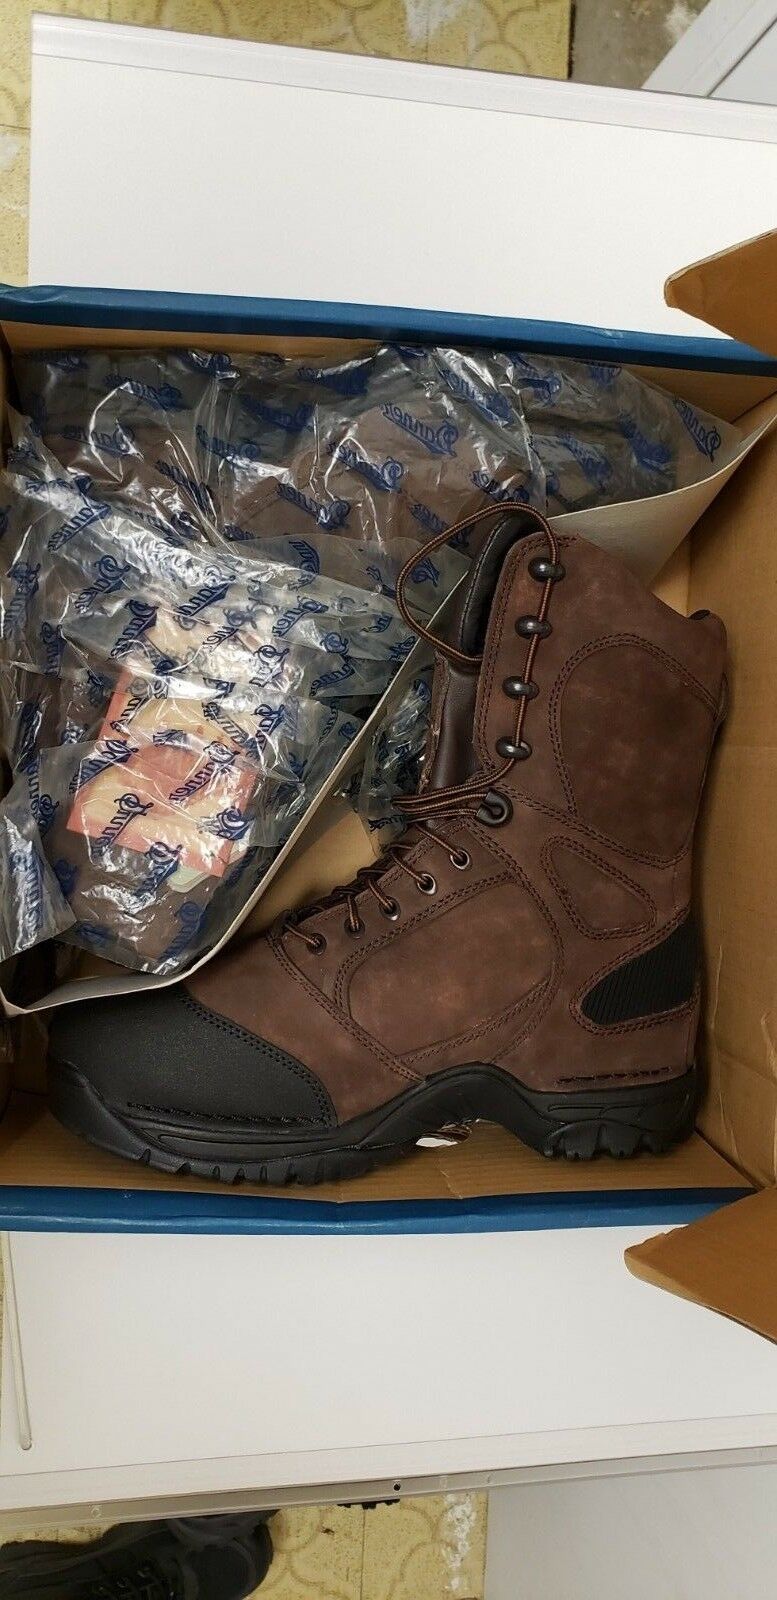 Danner Boots: Waterproof Insulated BEST HUNTING BOOTS 48030 MEN'S 10 IN HUNTING